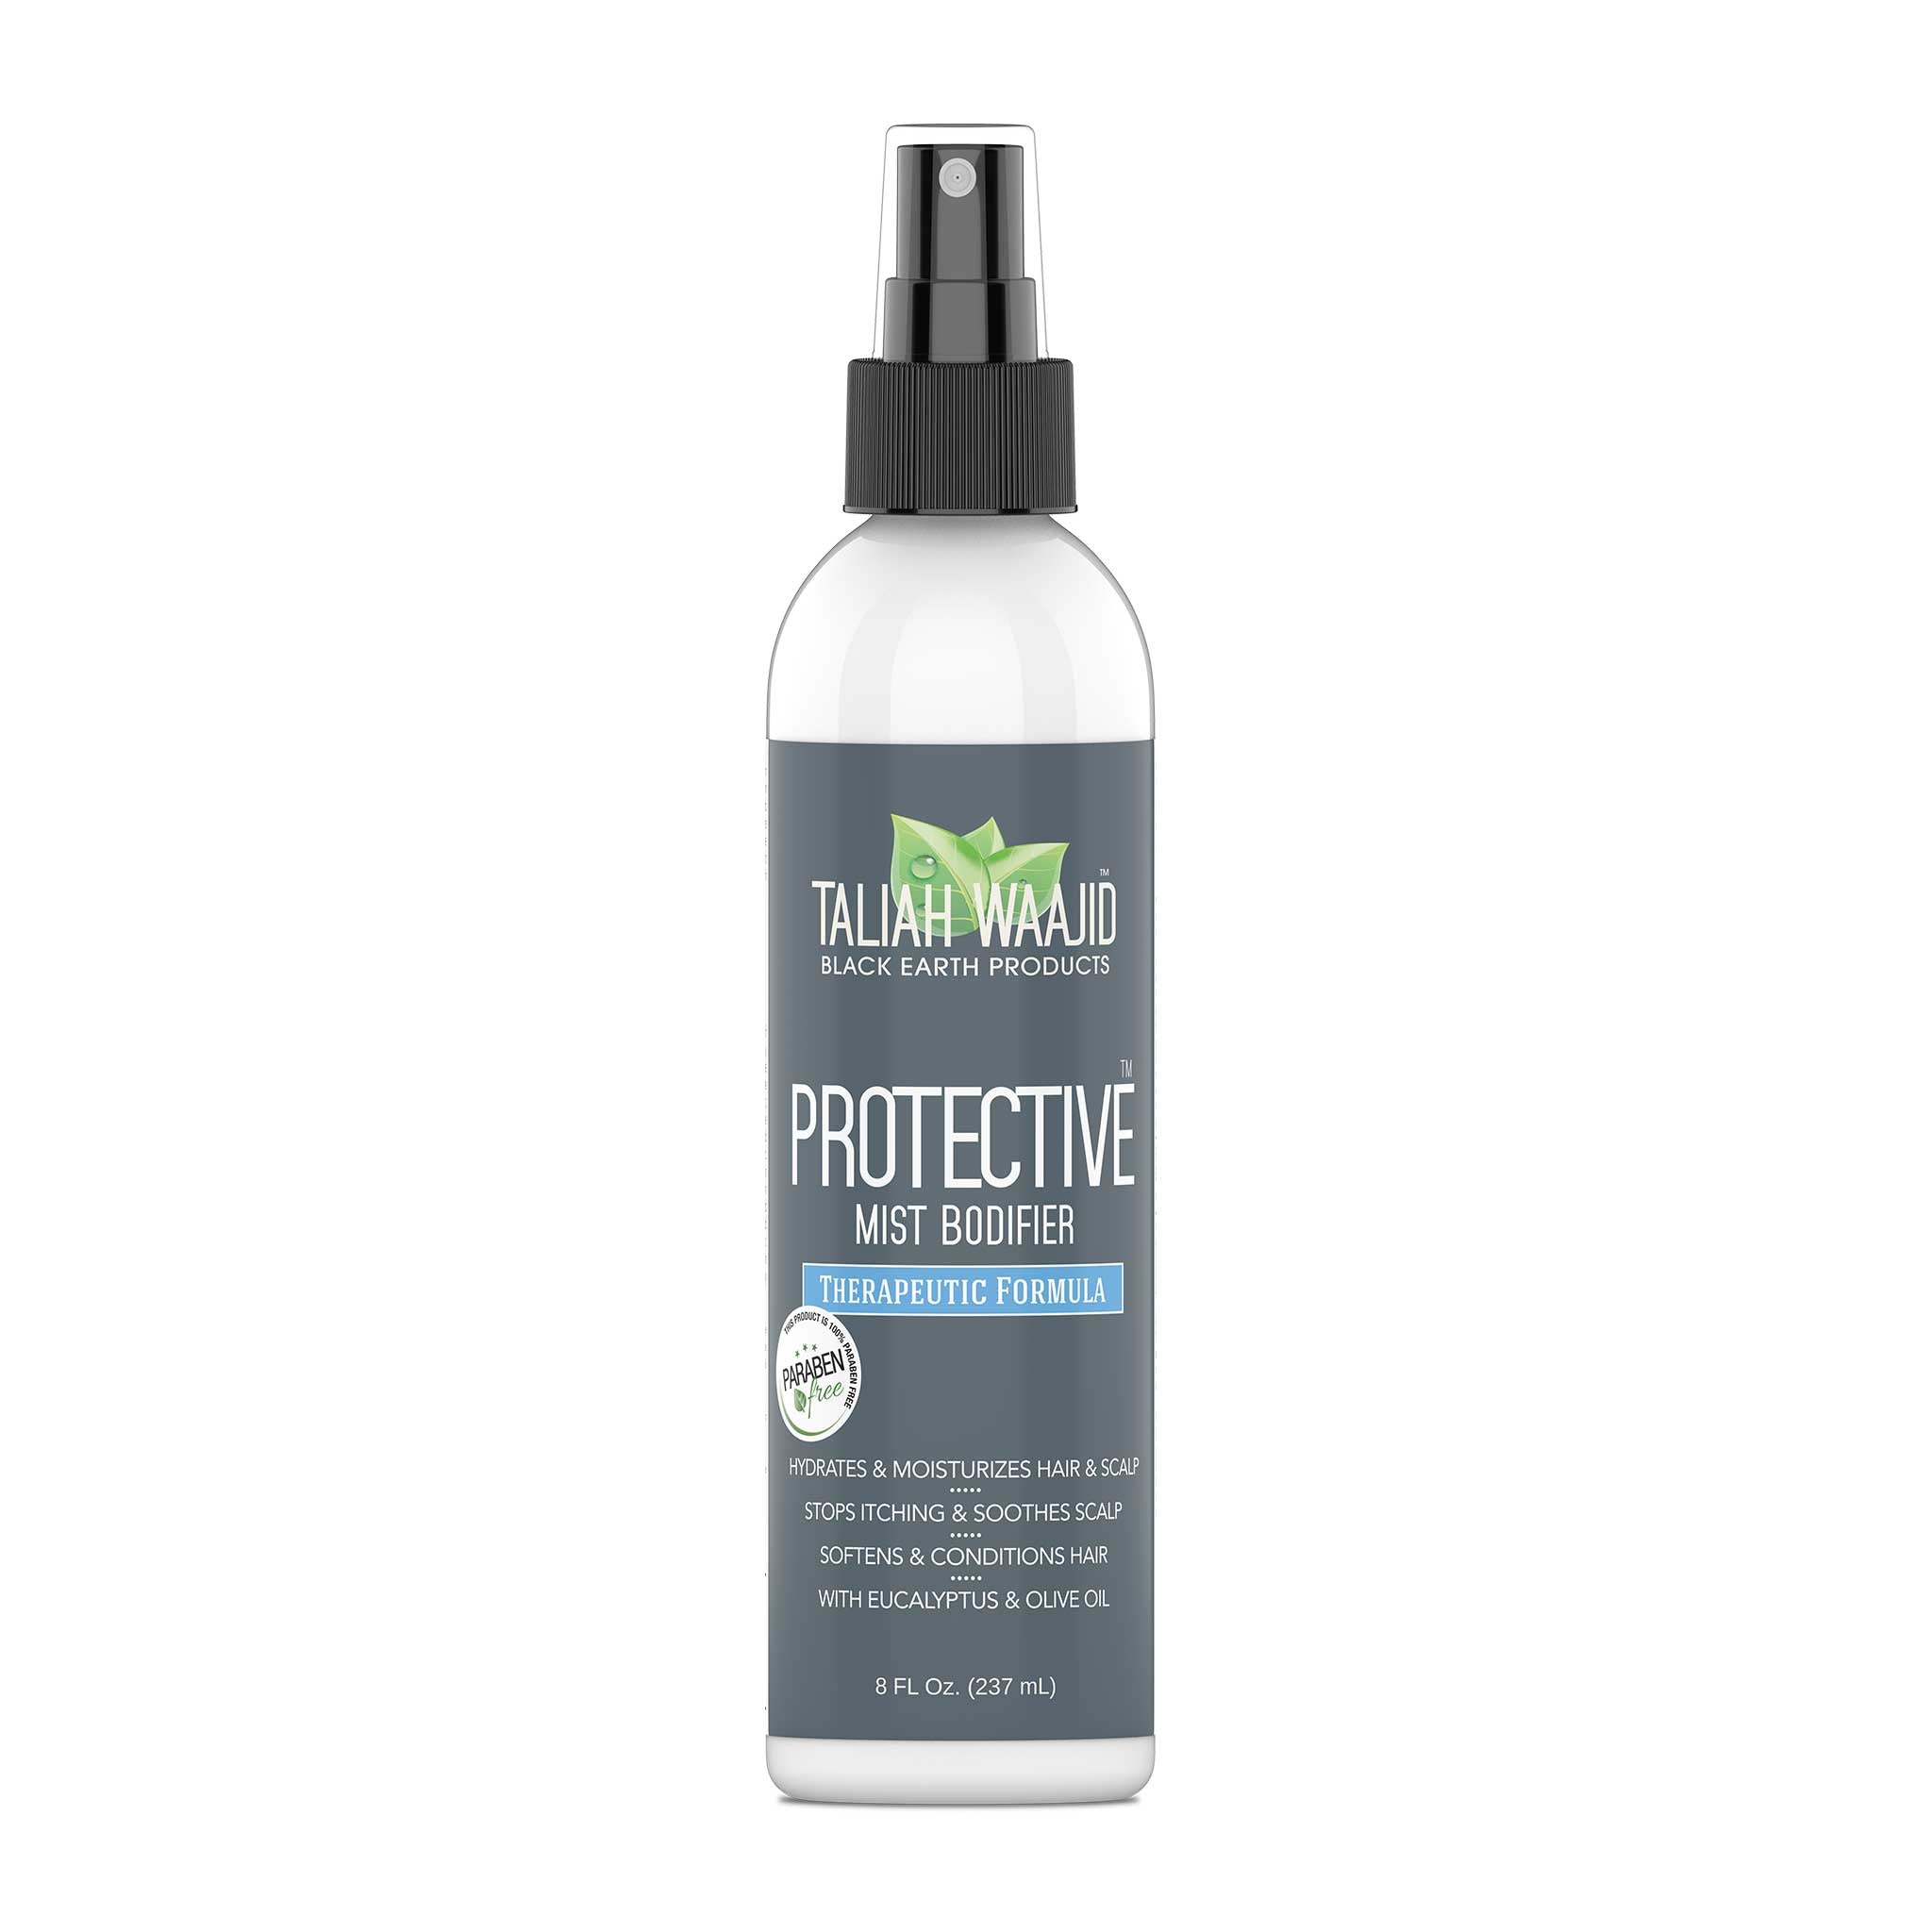 Black Earth Products Protective Mist Bodifier Therapeutic 8oz